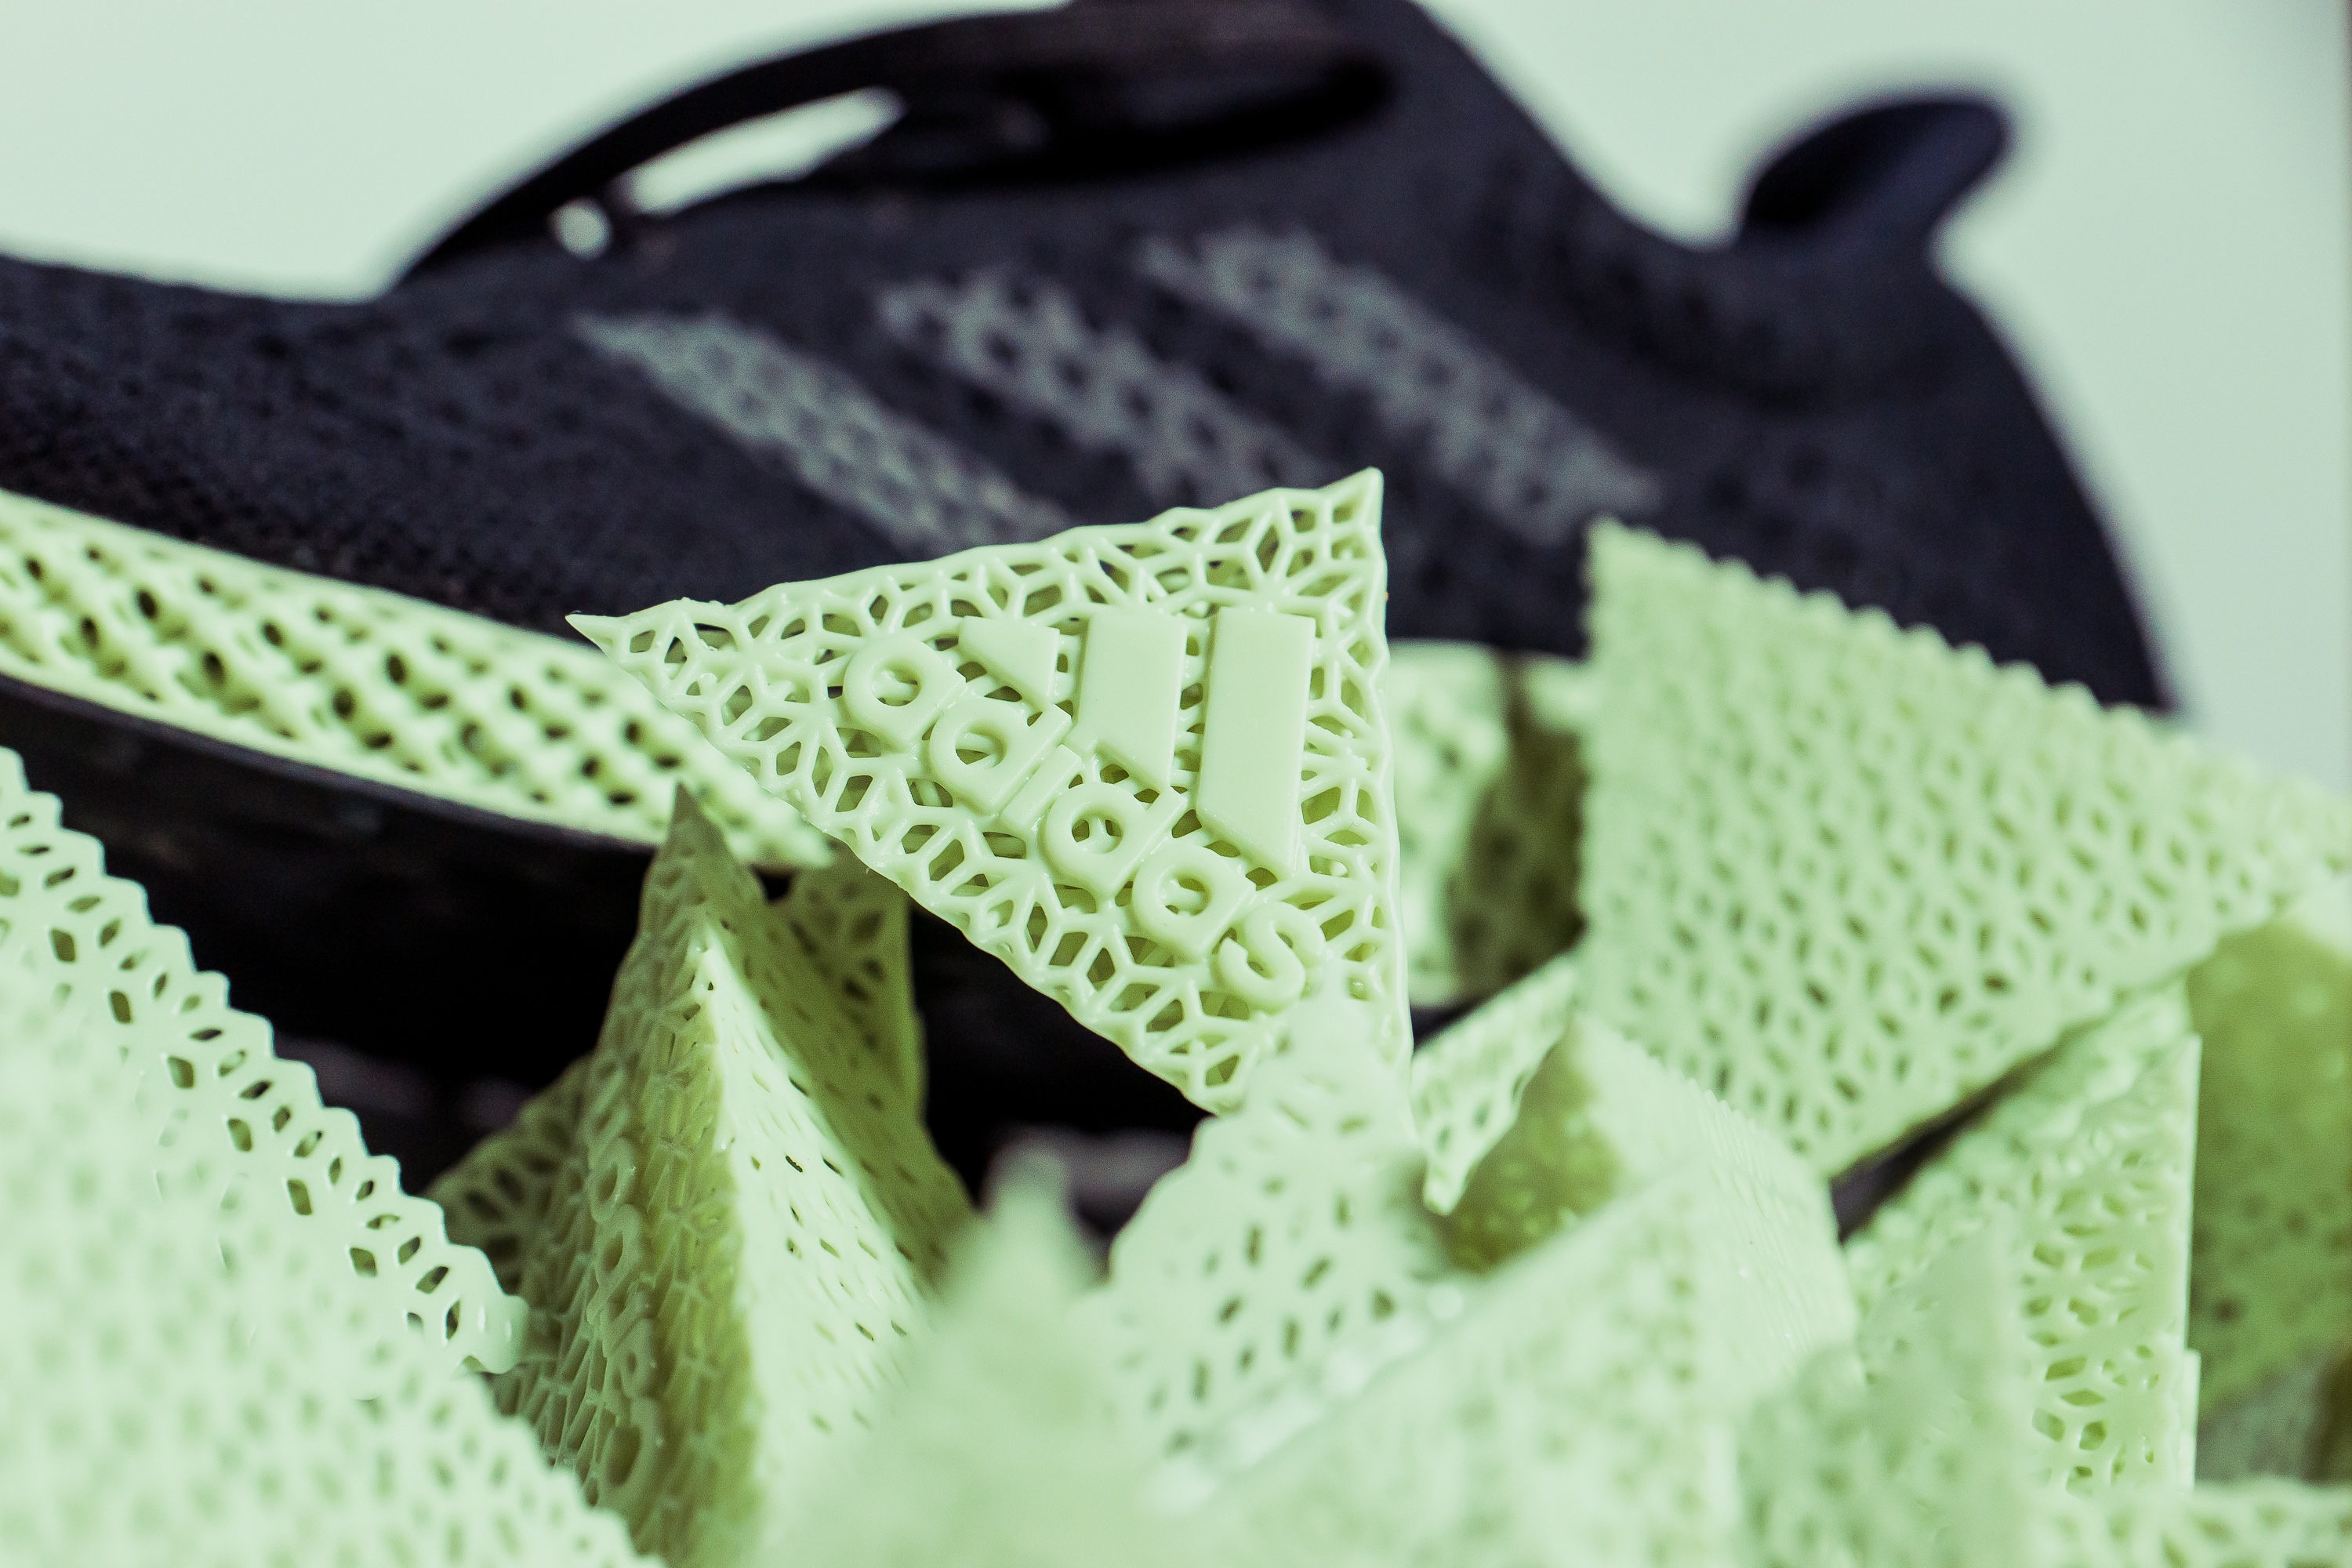 Packer reopening adidas futurecraft 4D giveaway 2